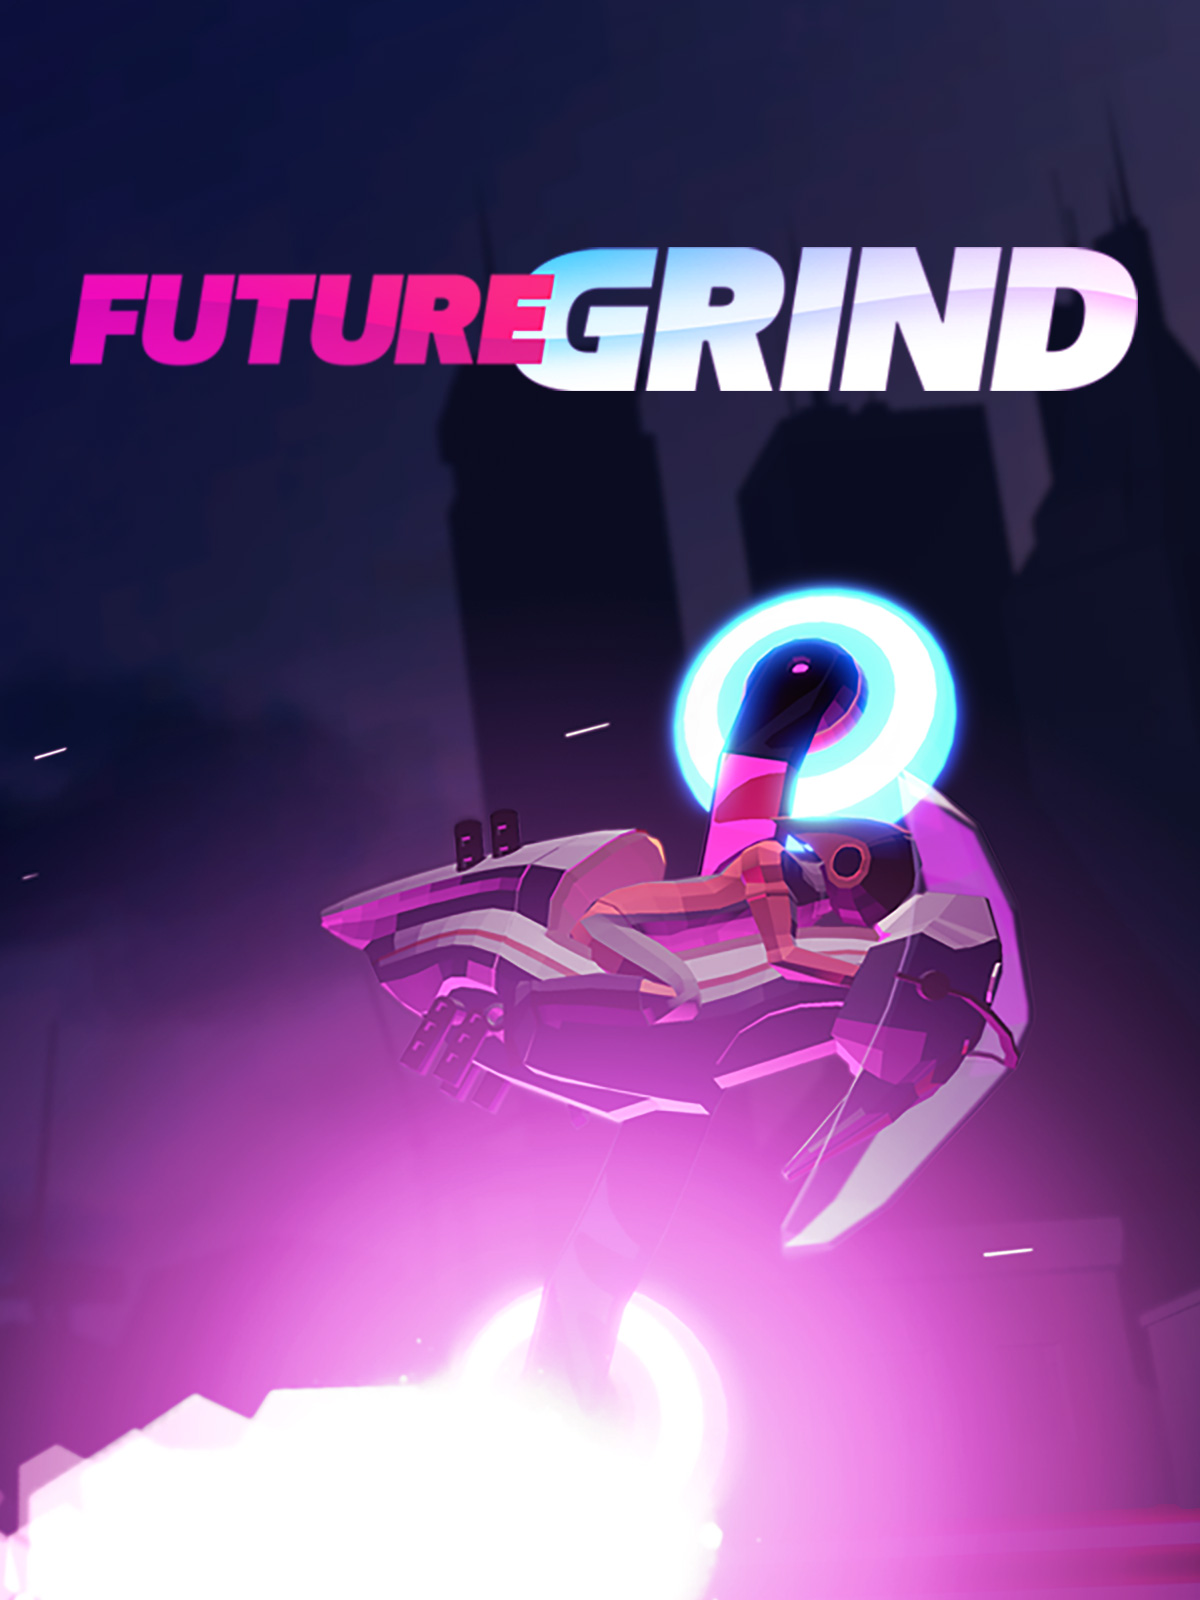 Futuregrind And Buy Today Epic Games Store